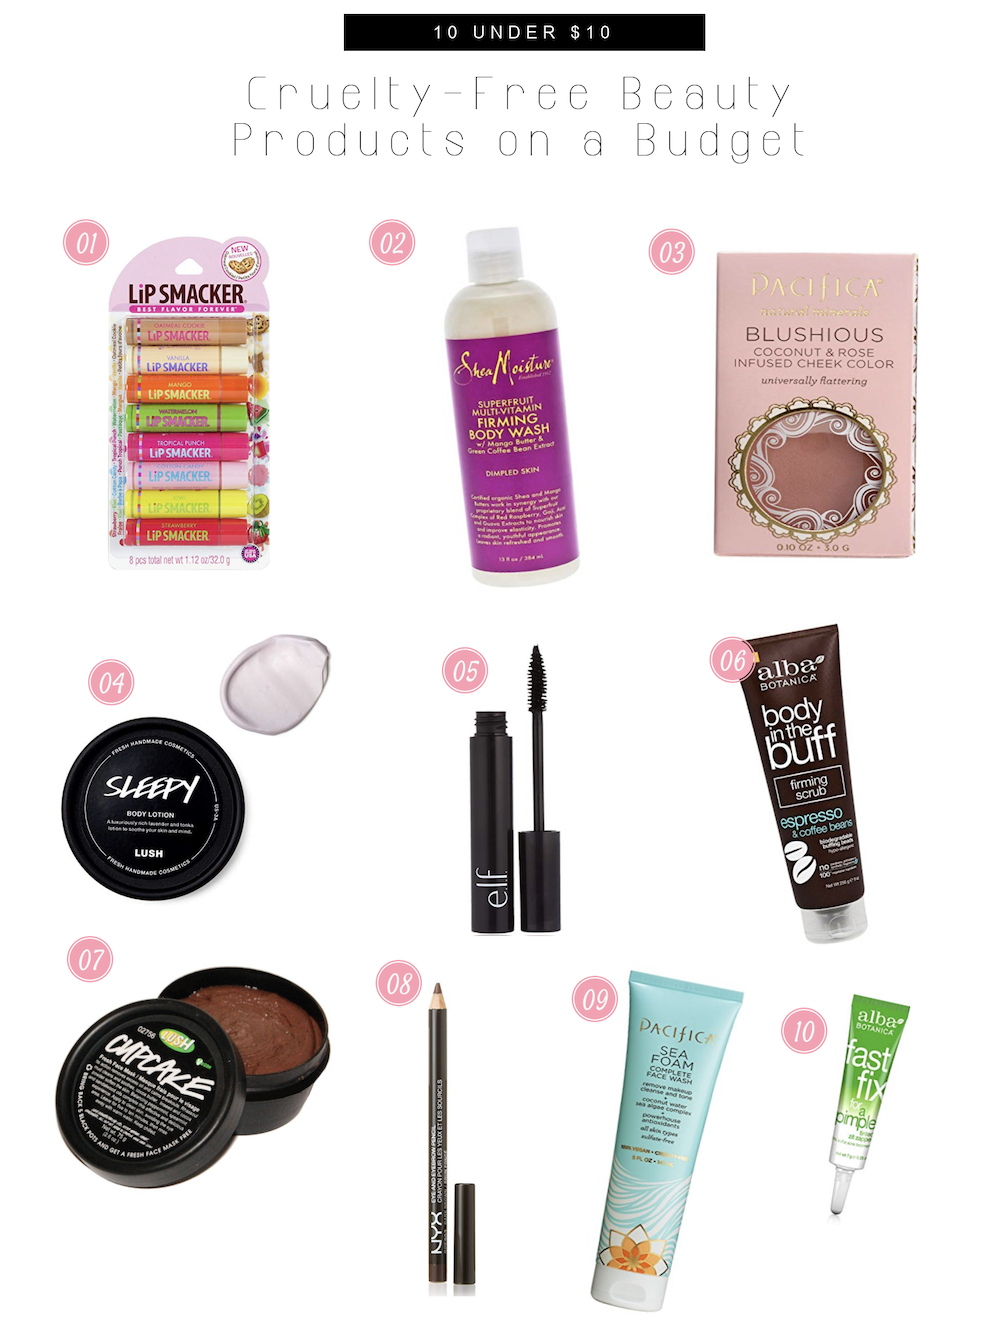 $10 Under 10: Cruelty-Free Beauty Products on a Budget